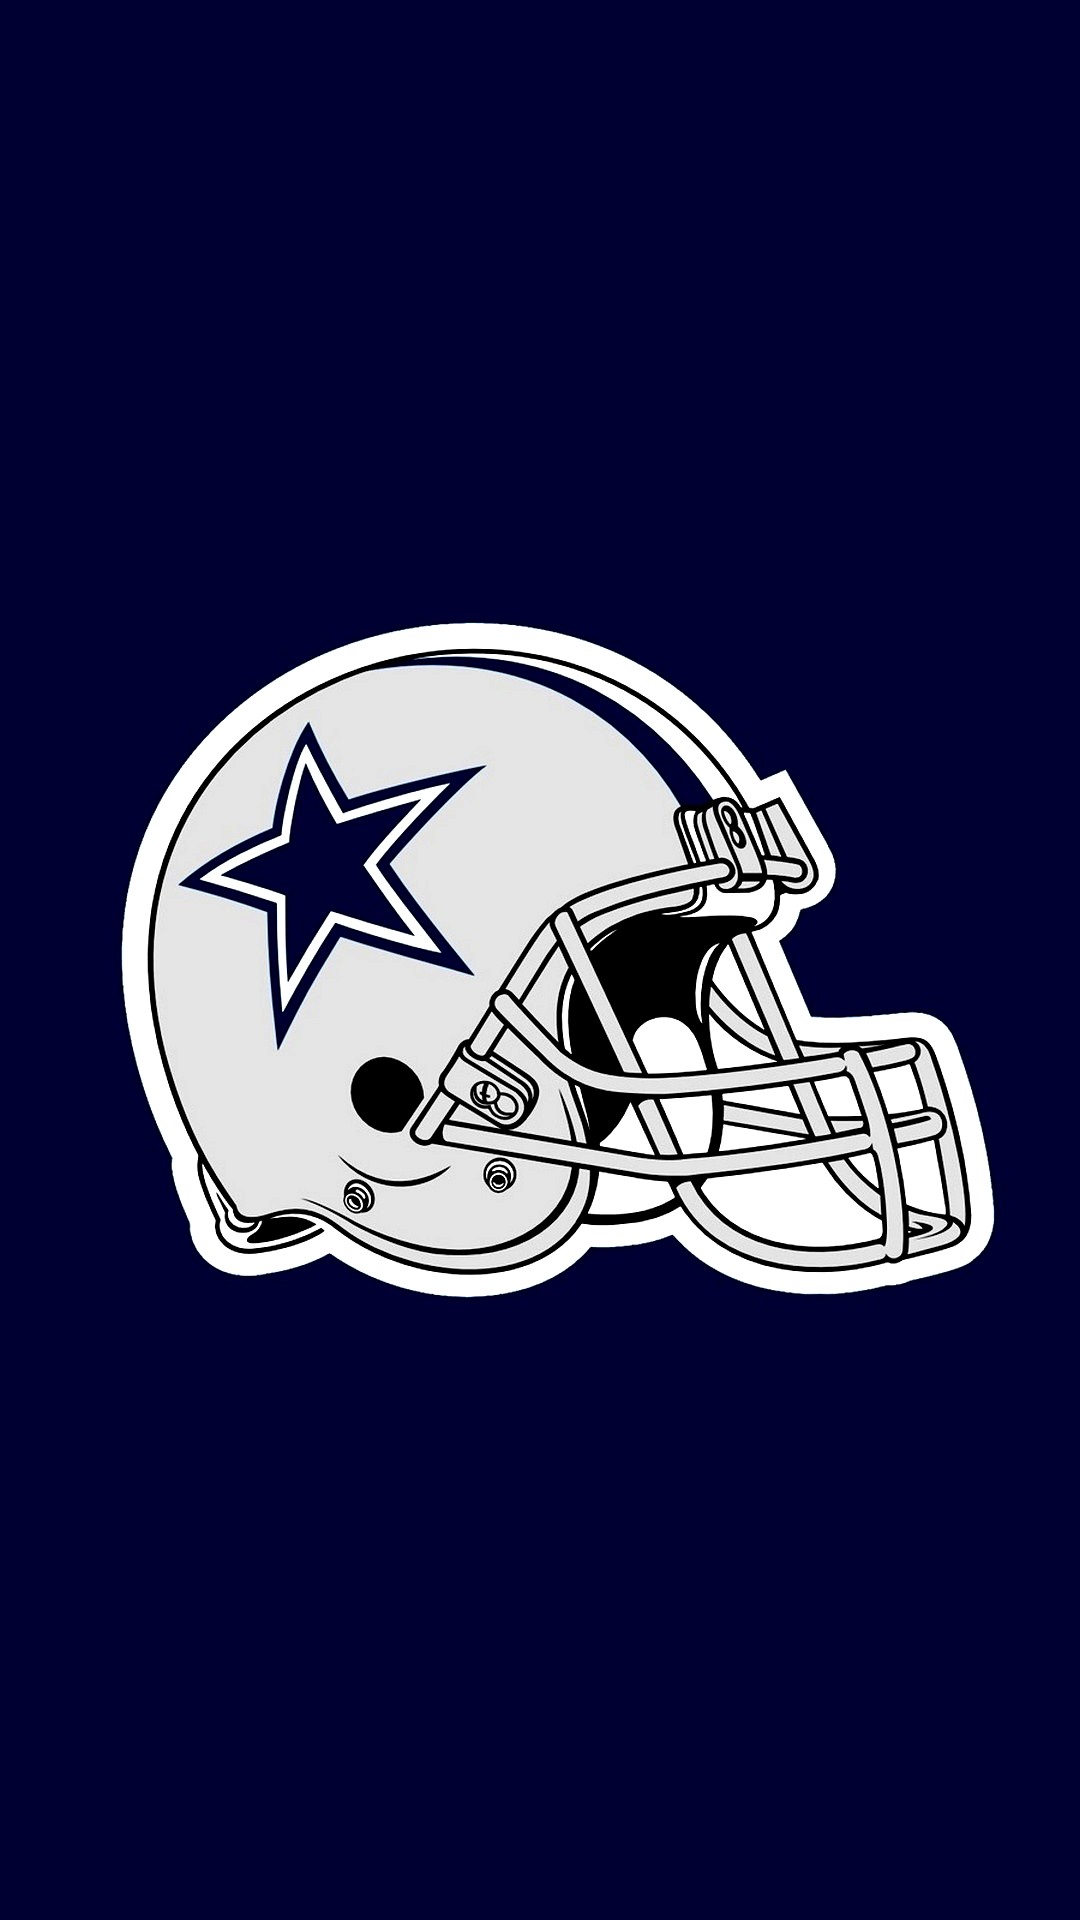 Wallpaper Dallas Cowboys Android with high-resolution 1080x1920 pixel. You can use this wallpaper for your Android backgrounds, Tablet, Samsung Screensavers, Mobile Phone Lock Screen and another Smartphones device